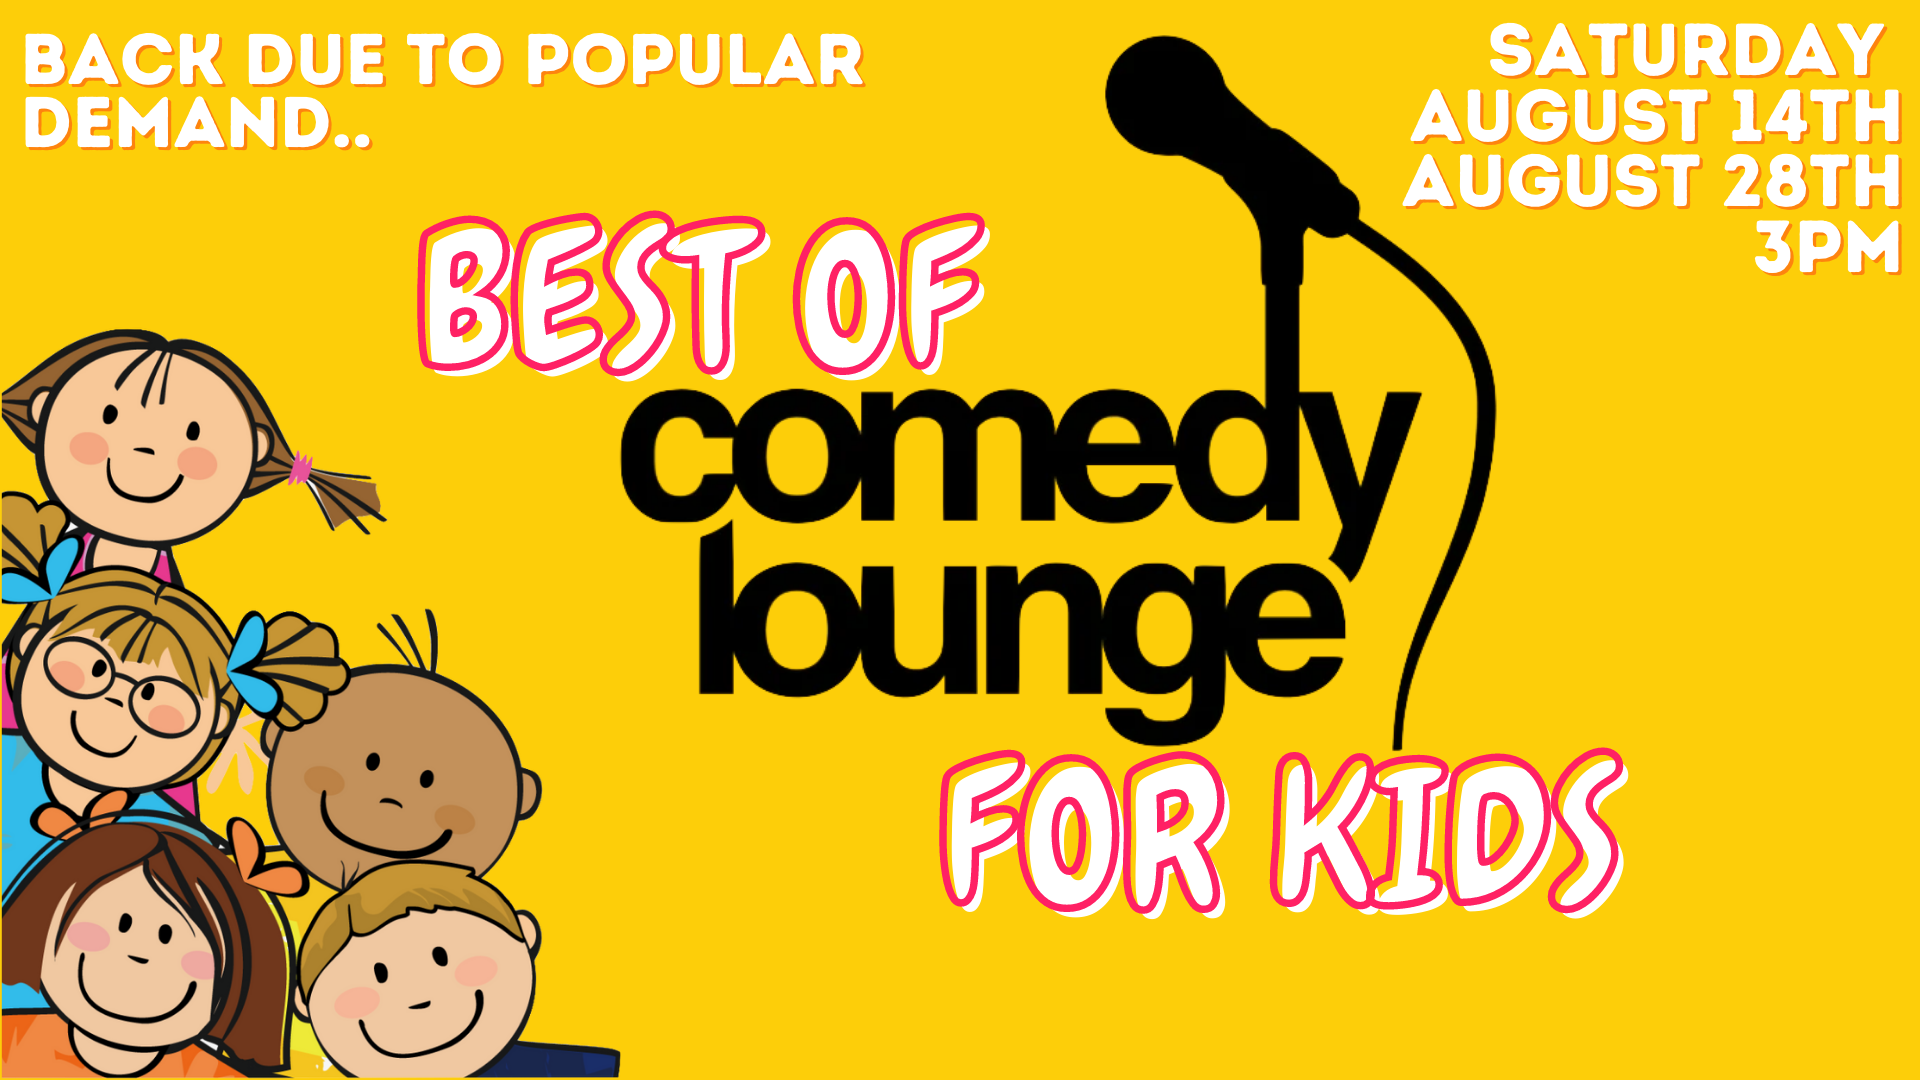 Best of Comedy Lounge for Kids